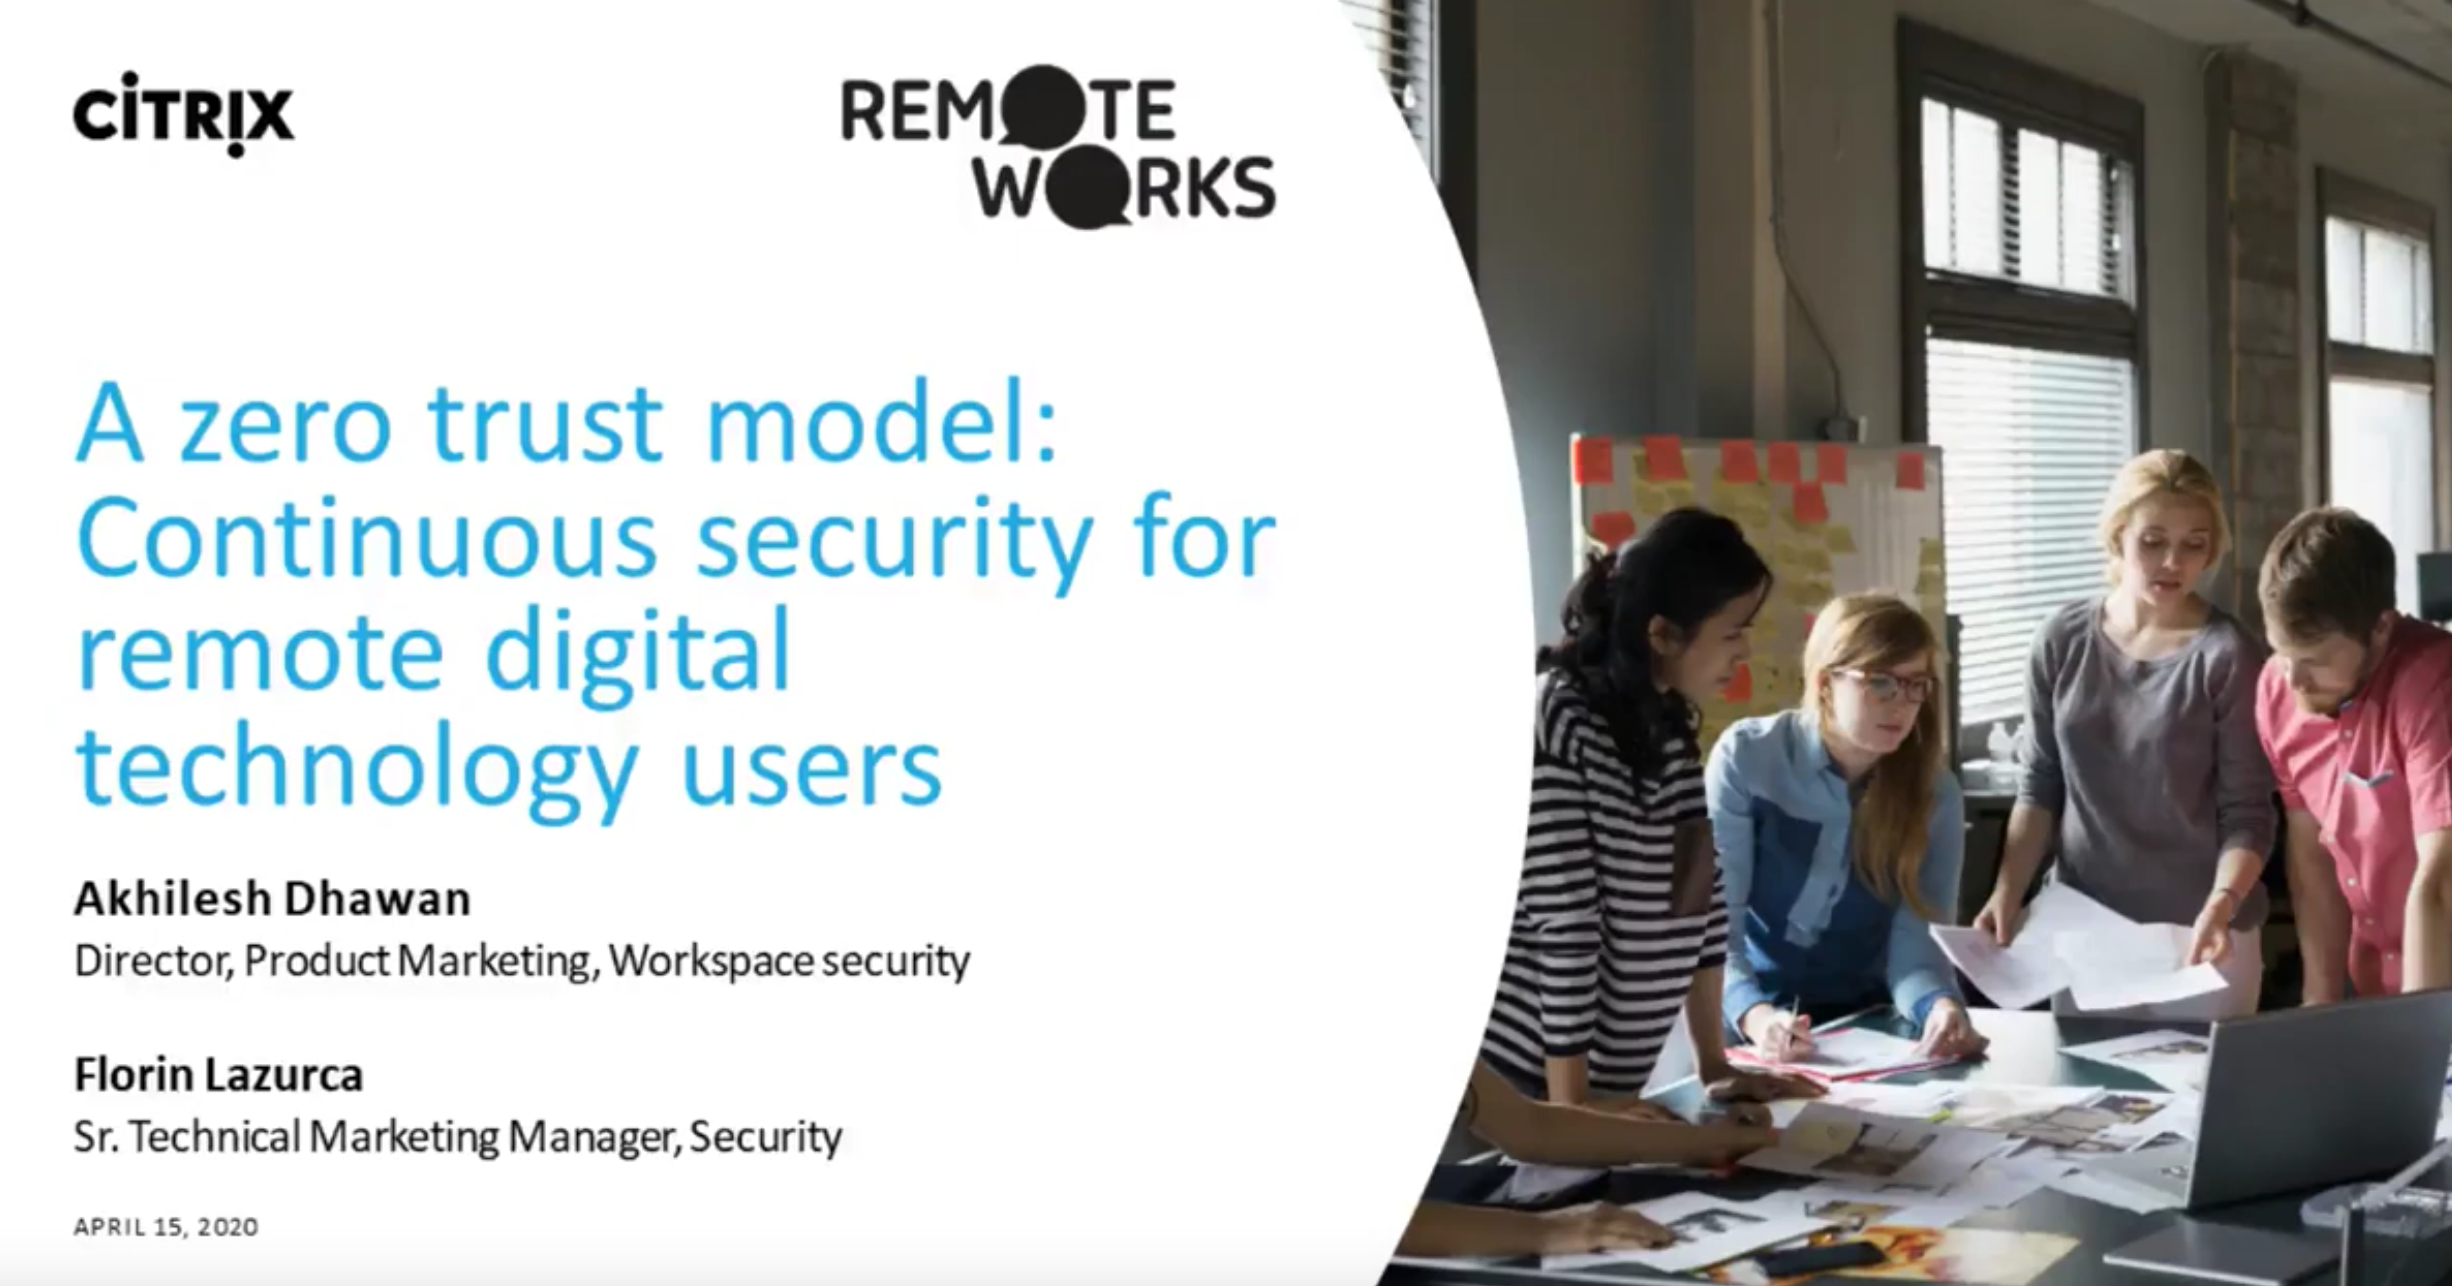 A zero trust model: continuous security for remote digital technology users